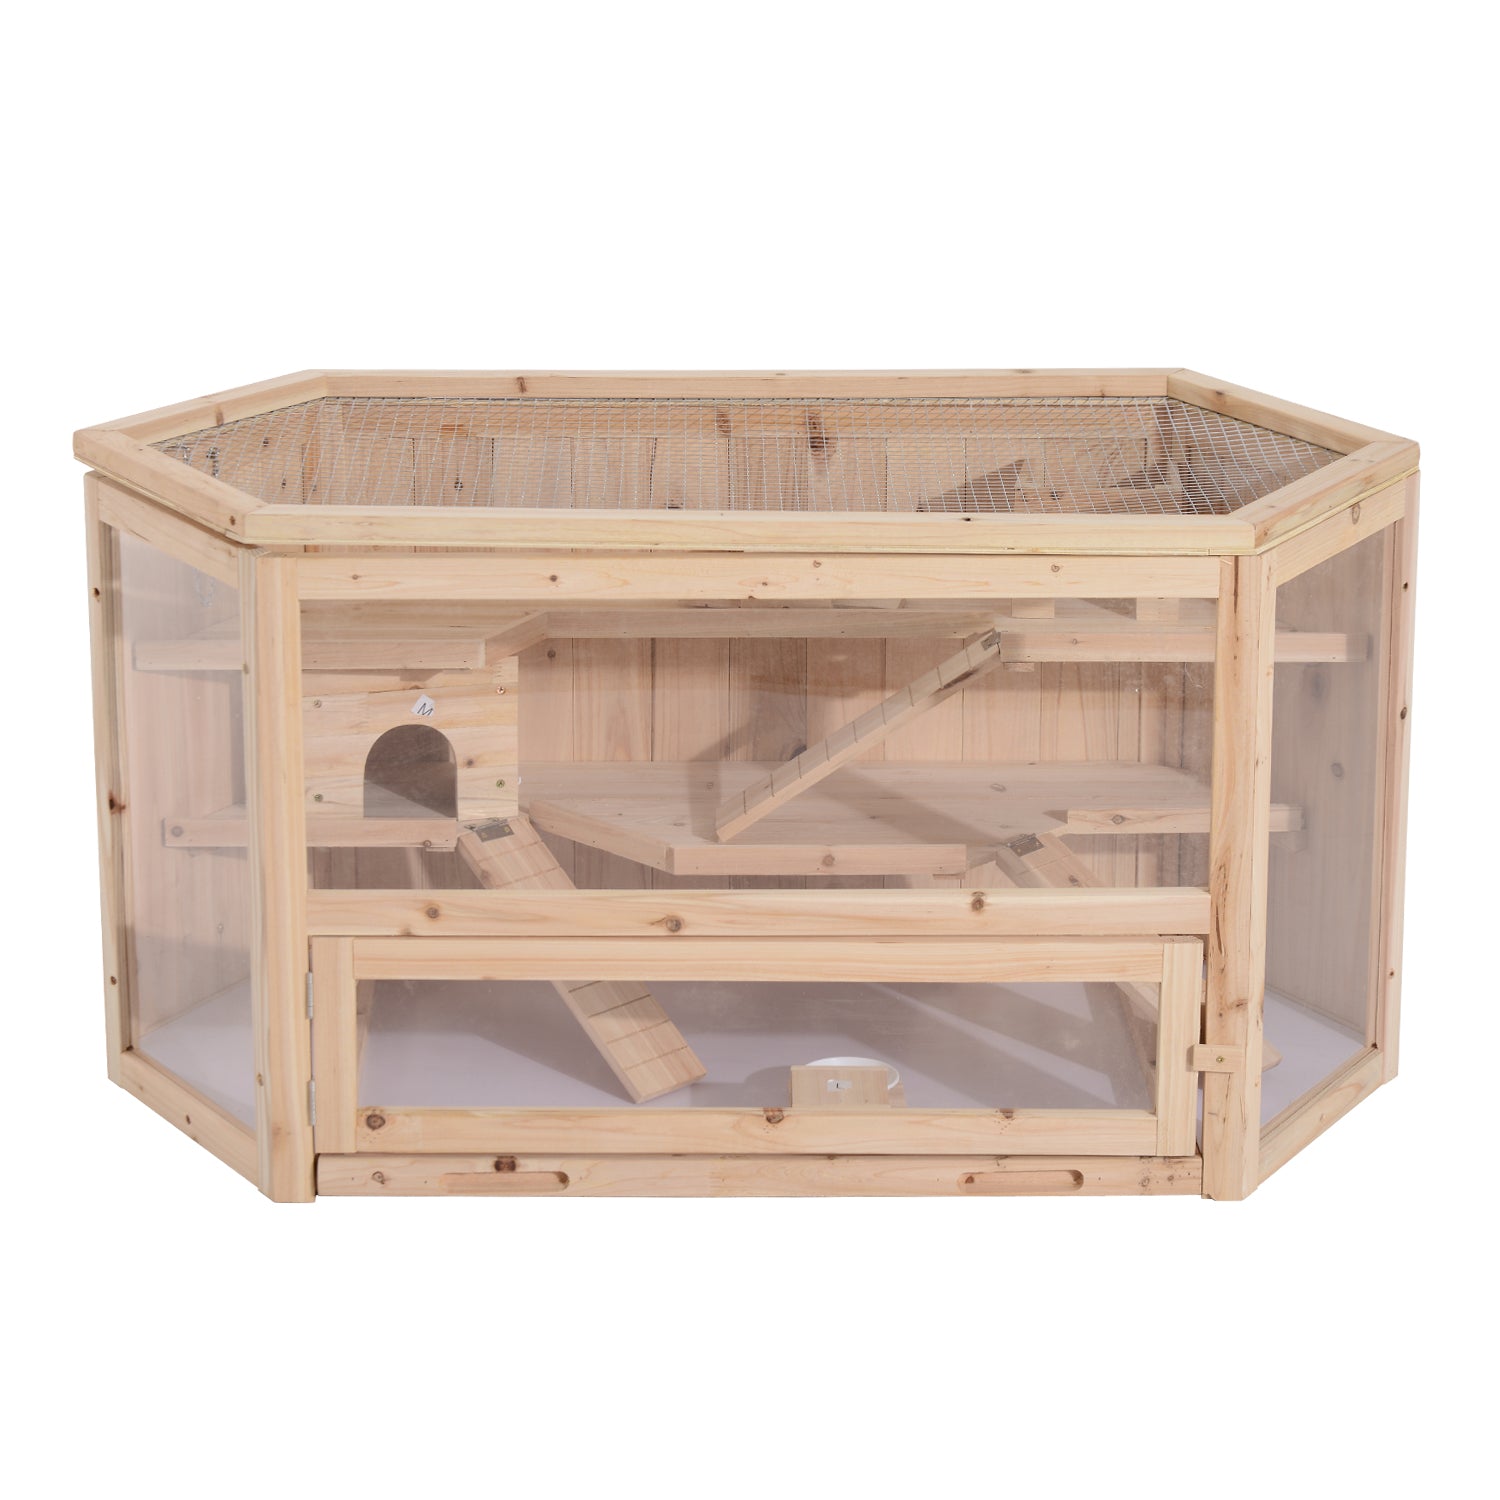 Wooden Hamster Cage Rodent Mouse Pet Small Animal hut Box, 115Lx60Wx58H cm